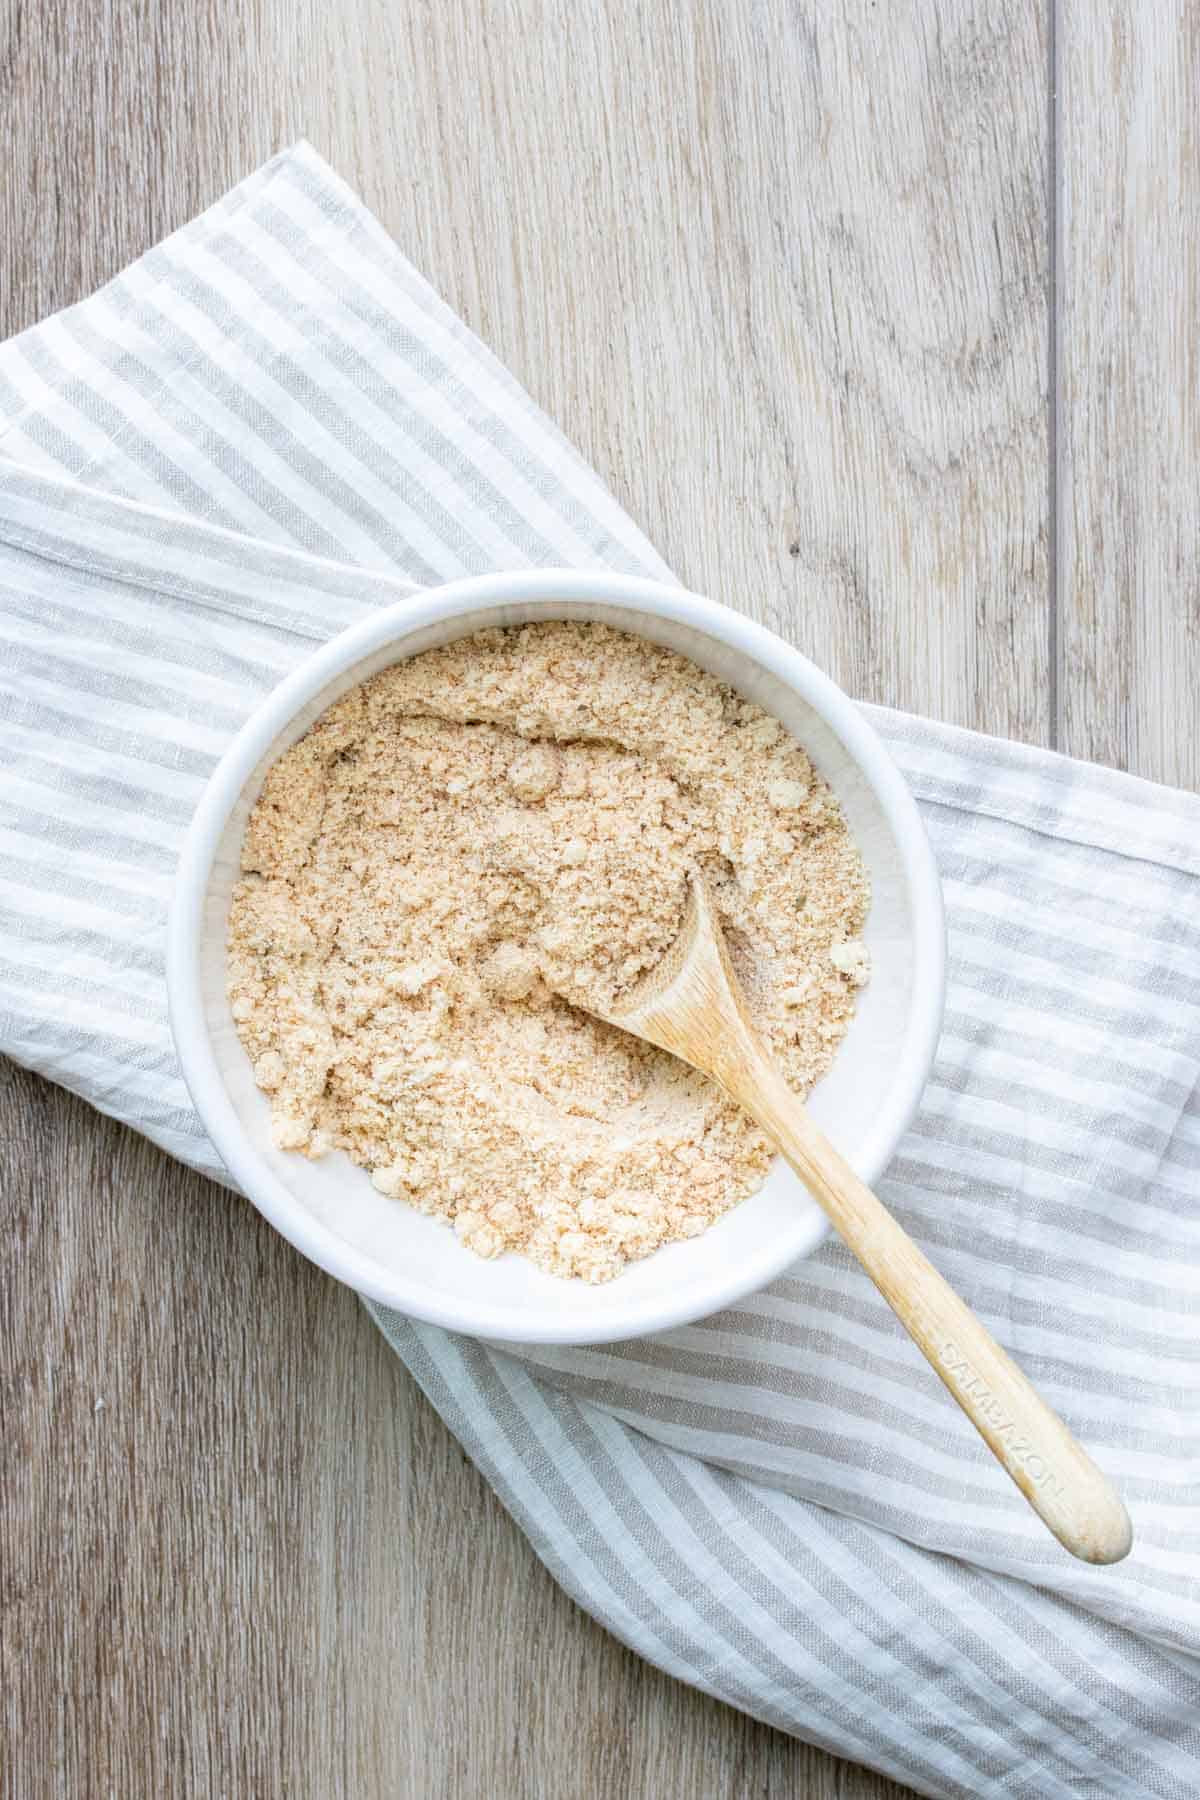 Wooden spoon mixing breadcrumb topping in a white bowl